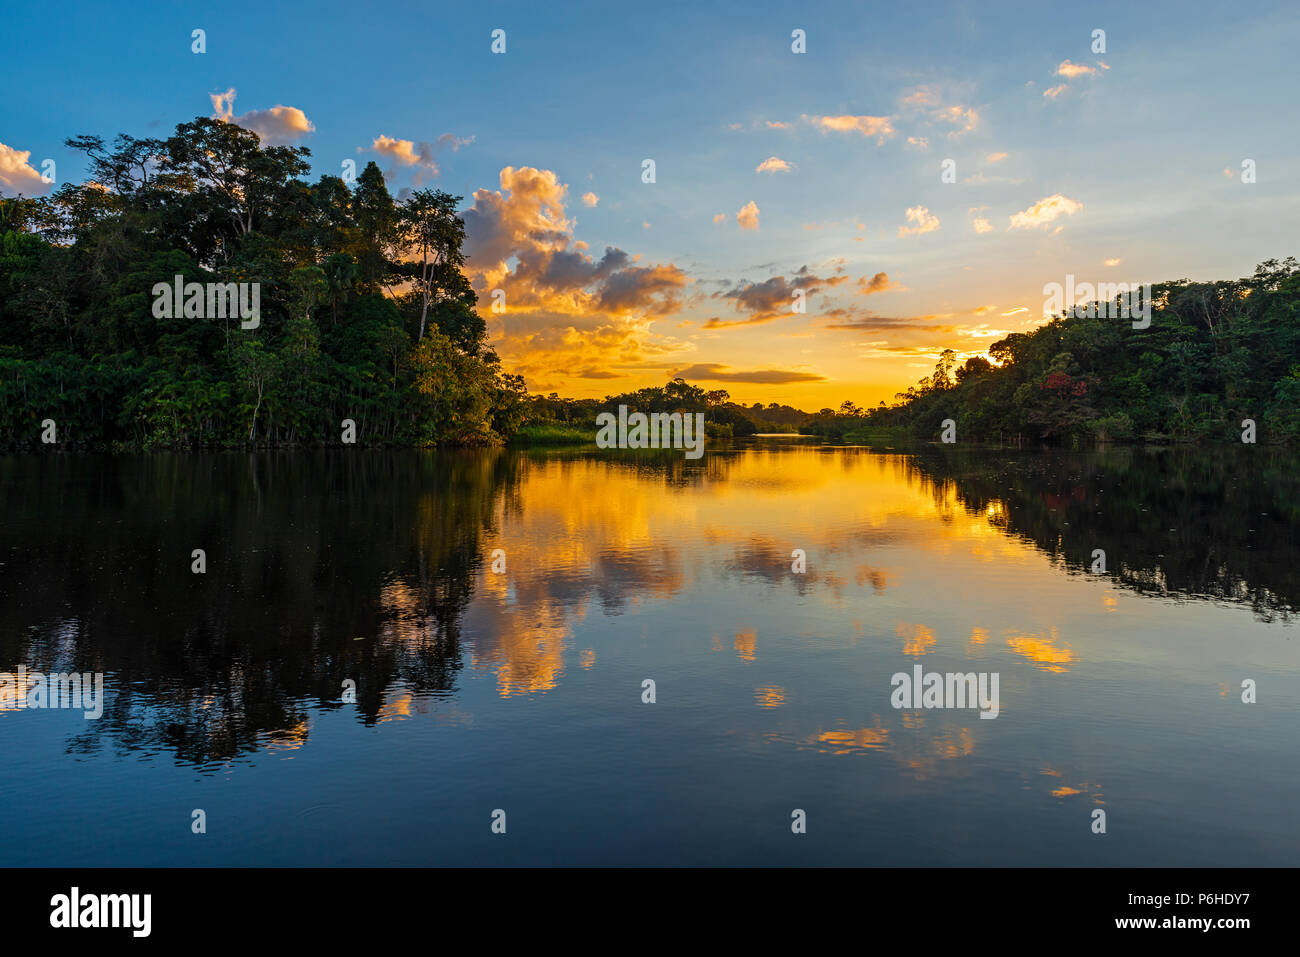 Sunset in the Amazon River Rainforest Basin with a reflection in a lagoon connected to the Napo River inside the Yasuni National Park, Ecuador. Stock Photo